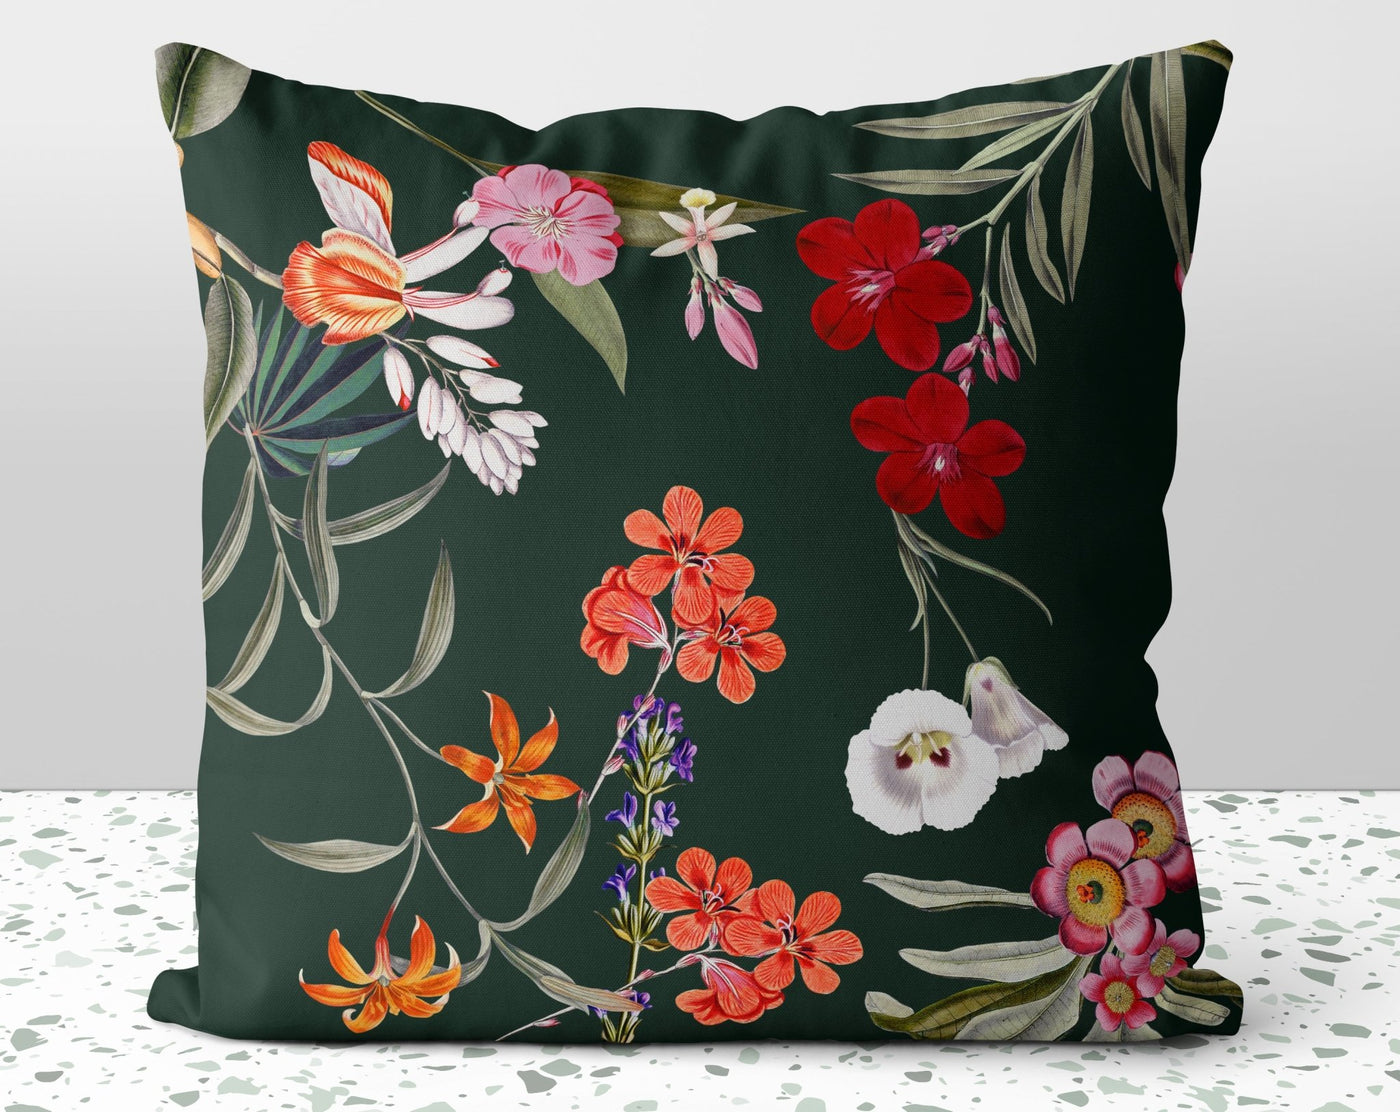 Fresh Floral Flowers on Everest Green Pillow Throw Cover with Insert - Cush Potato Pillows